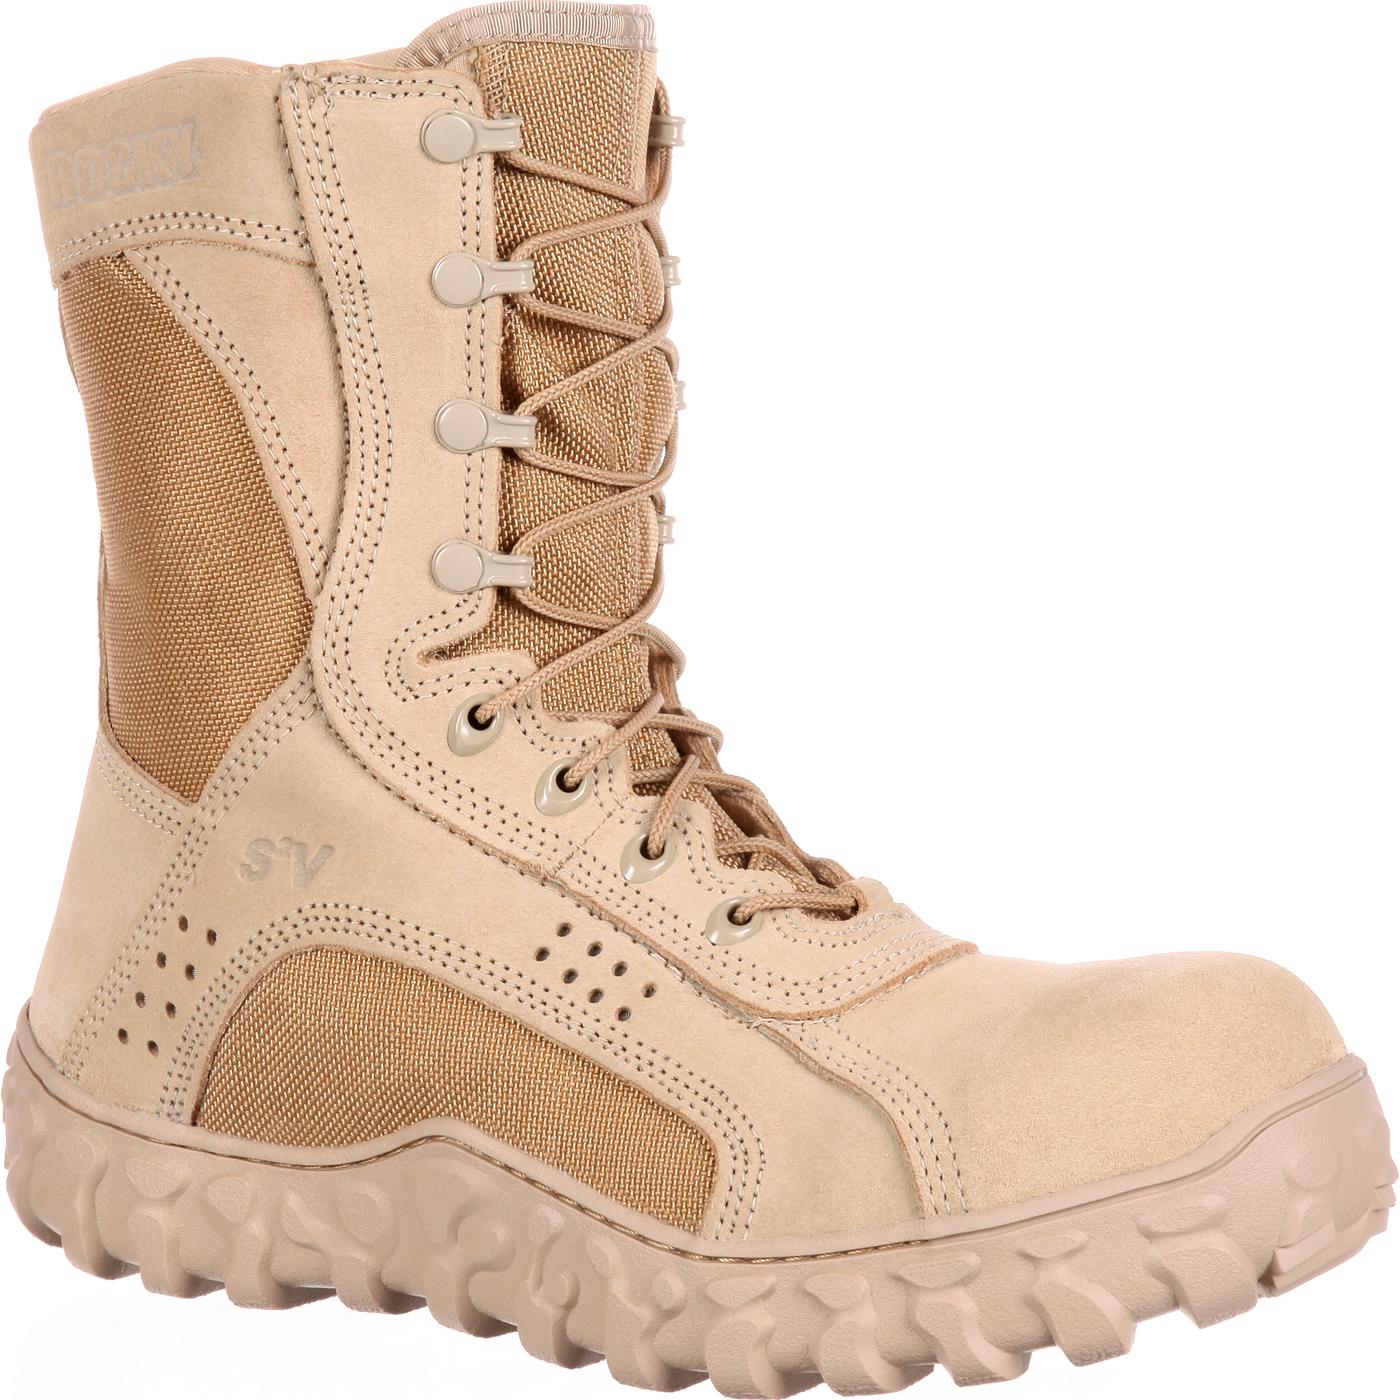 Rocky S2V Composite Toe Tactical Military Boot, RKYC028